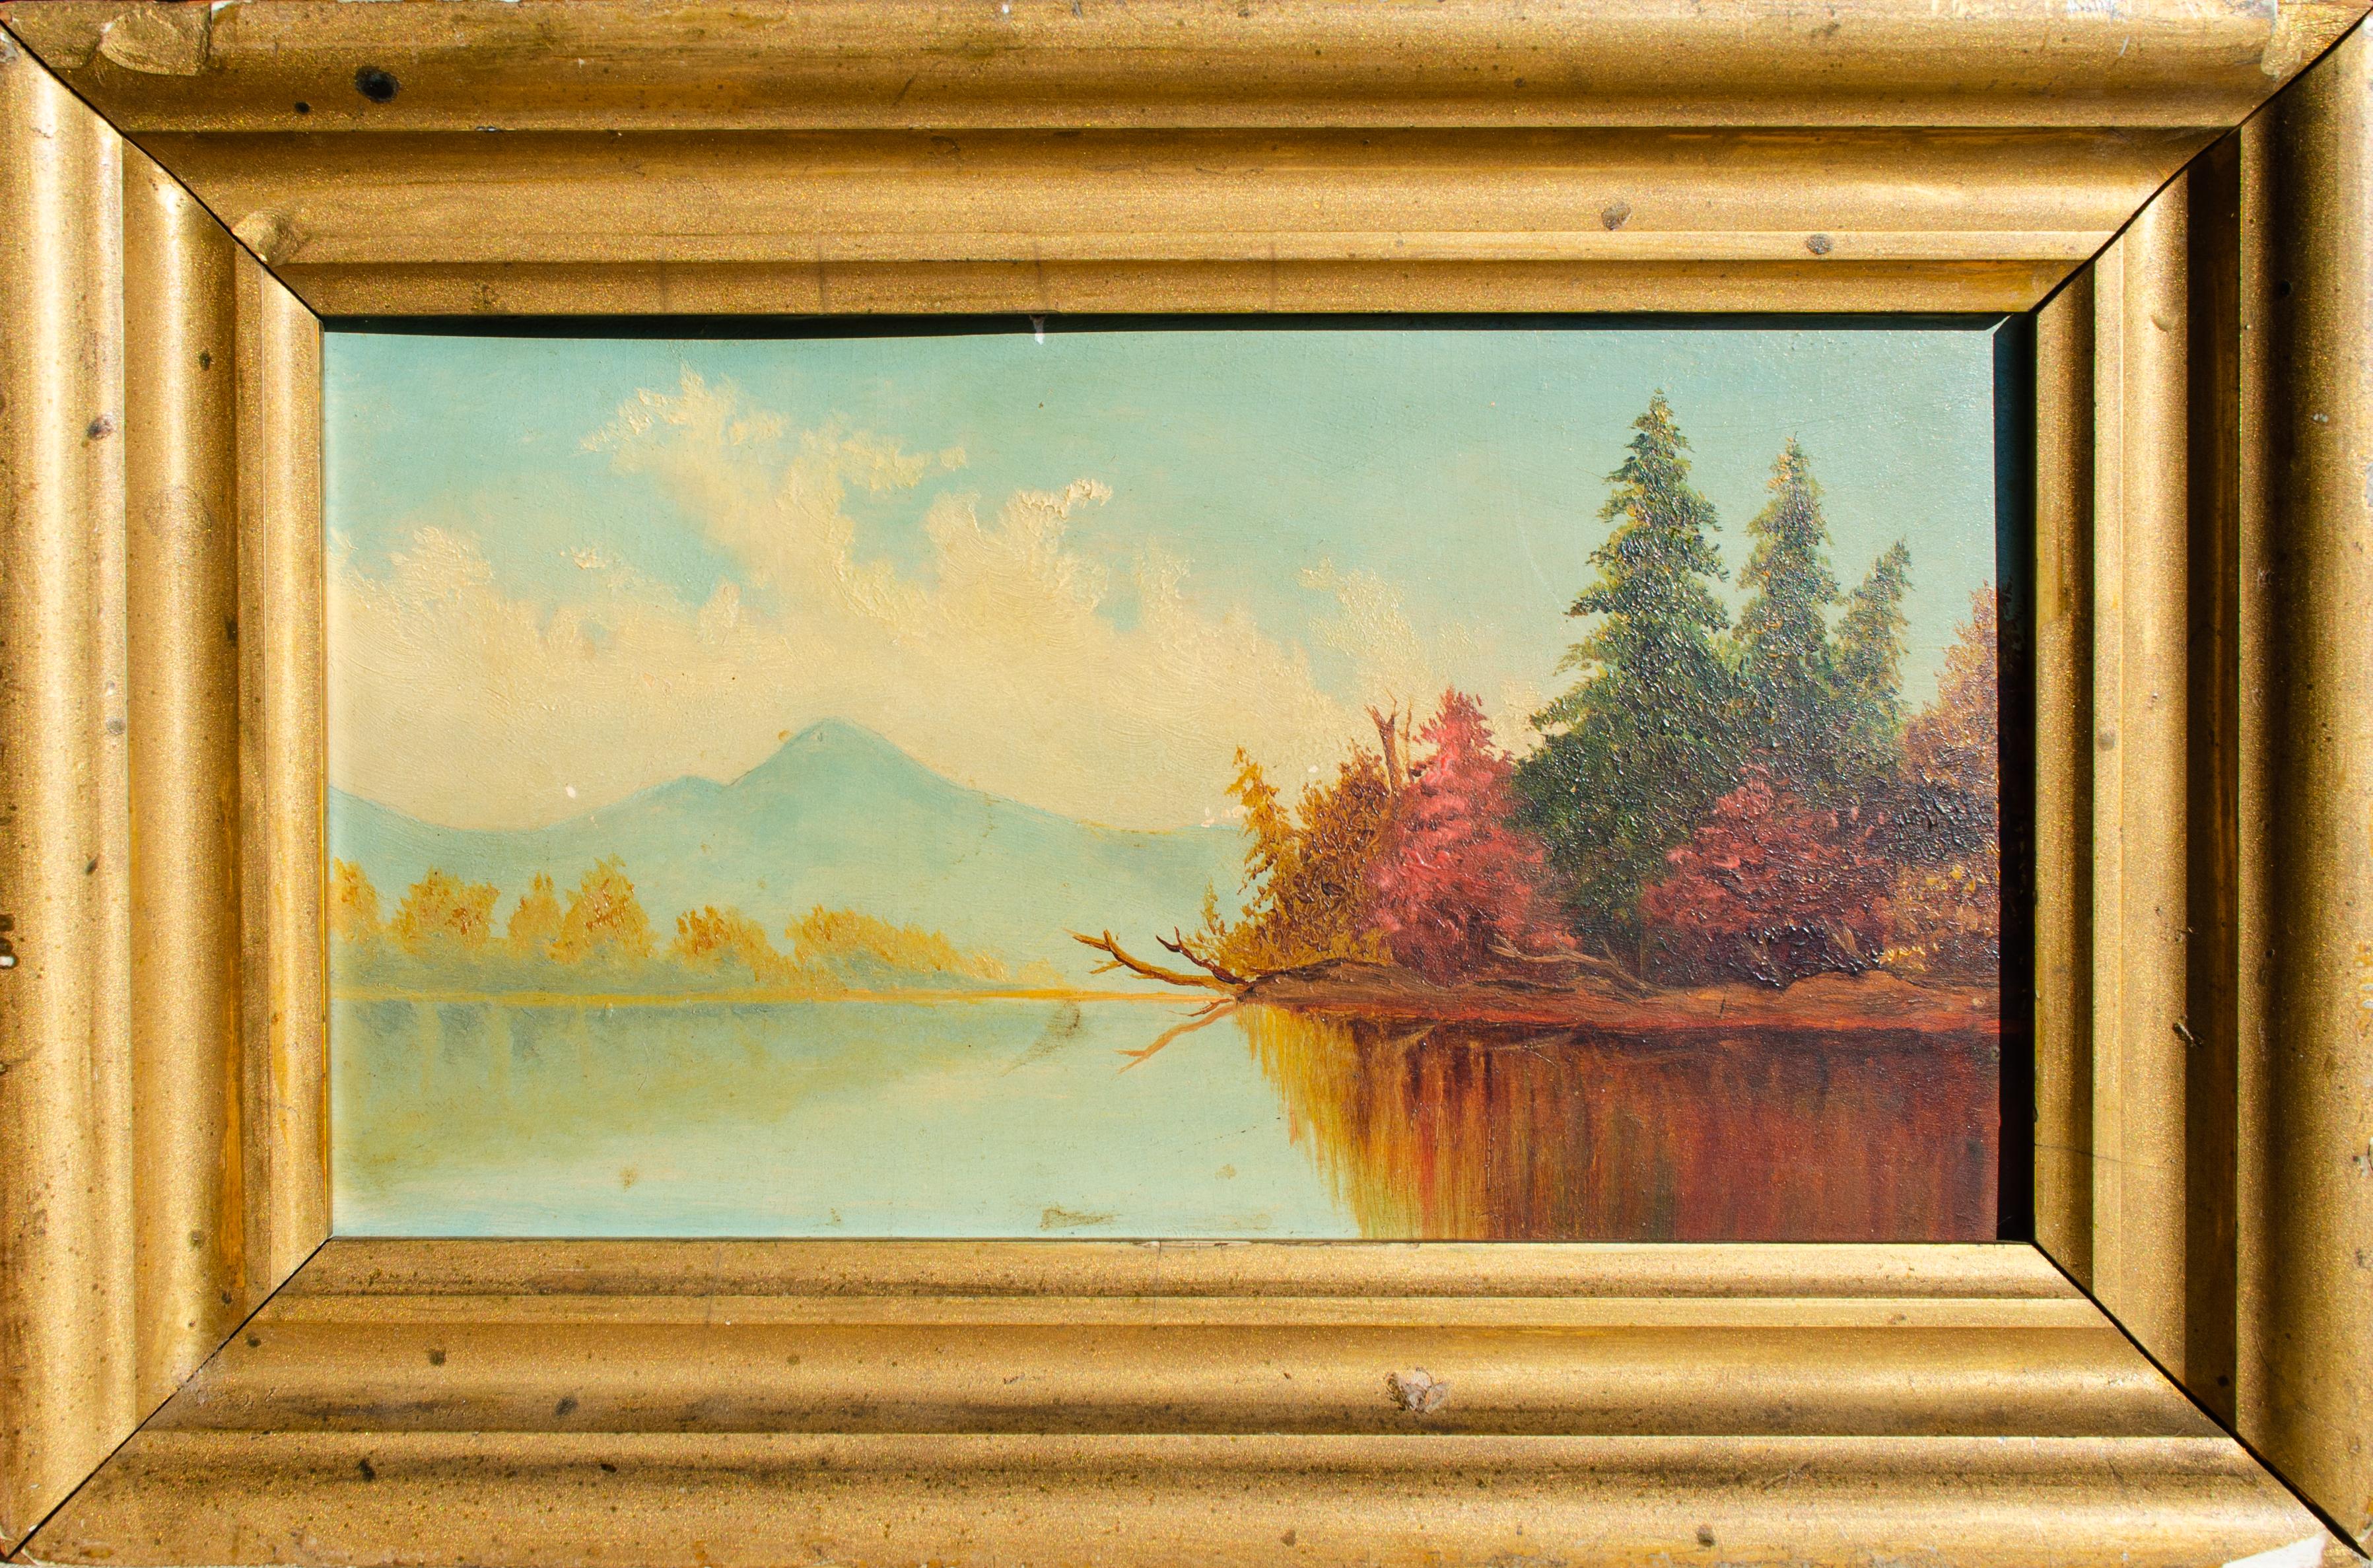 Unknown White Mountain Artist
White Mountain Landscape, 19th Century 
Oil on board
5 x 9 1/4 in.
Framed: 7 3/4 x 11 3/4 in.